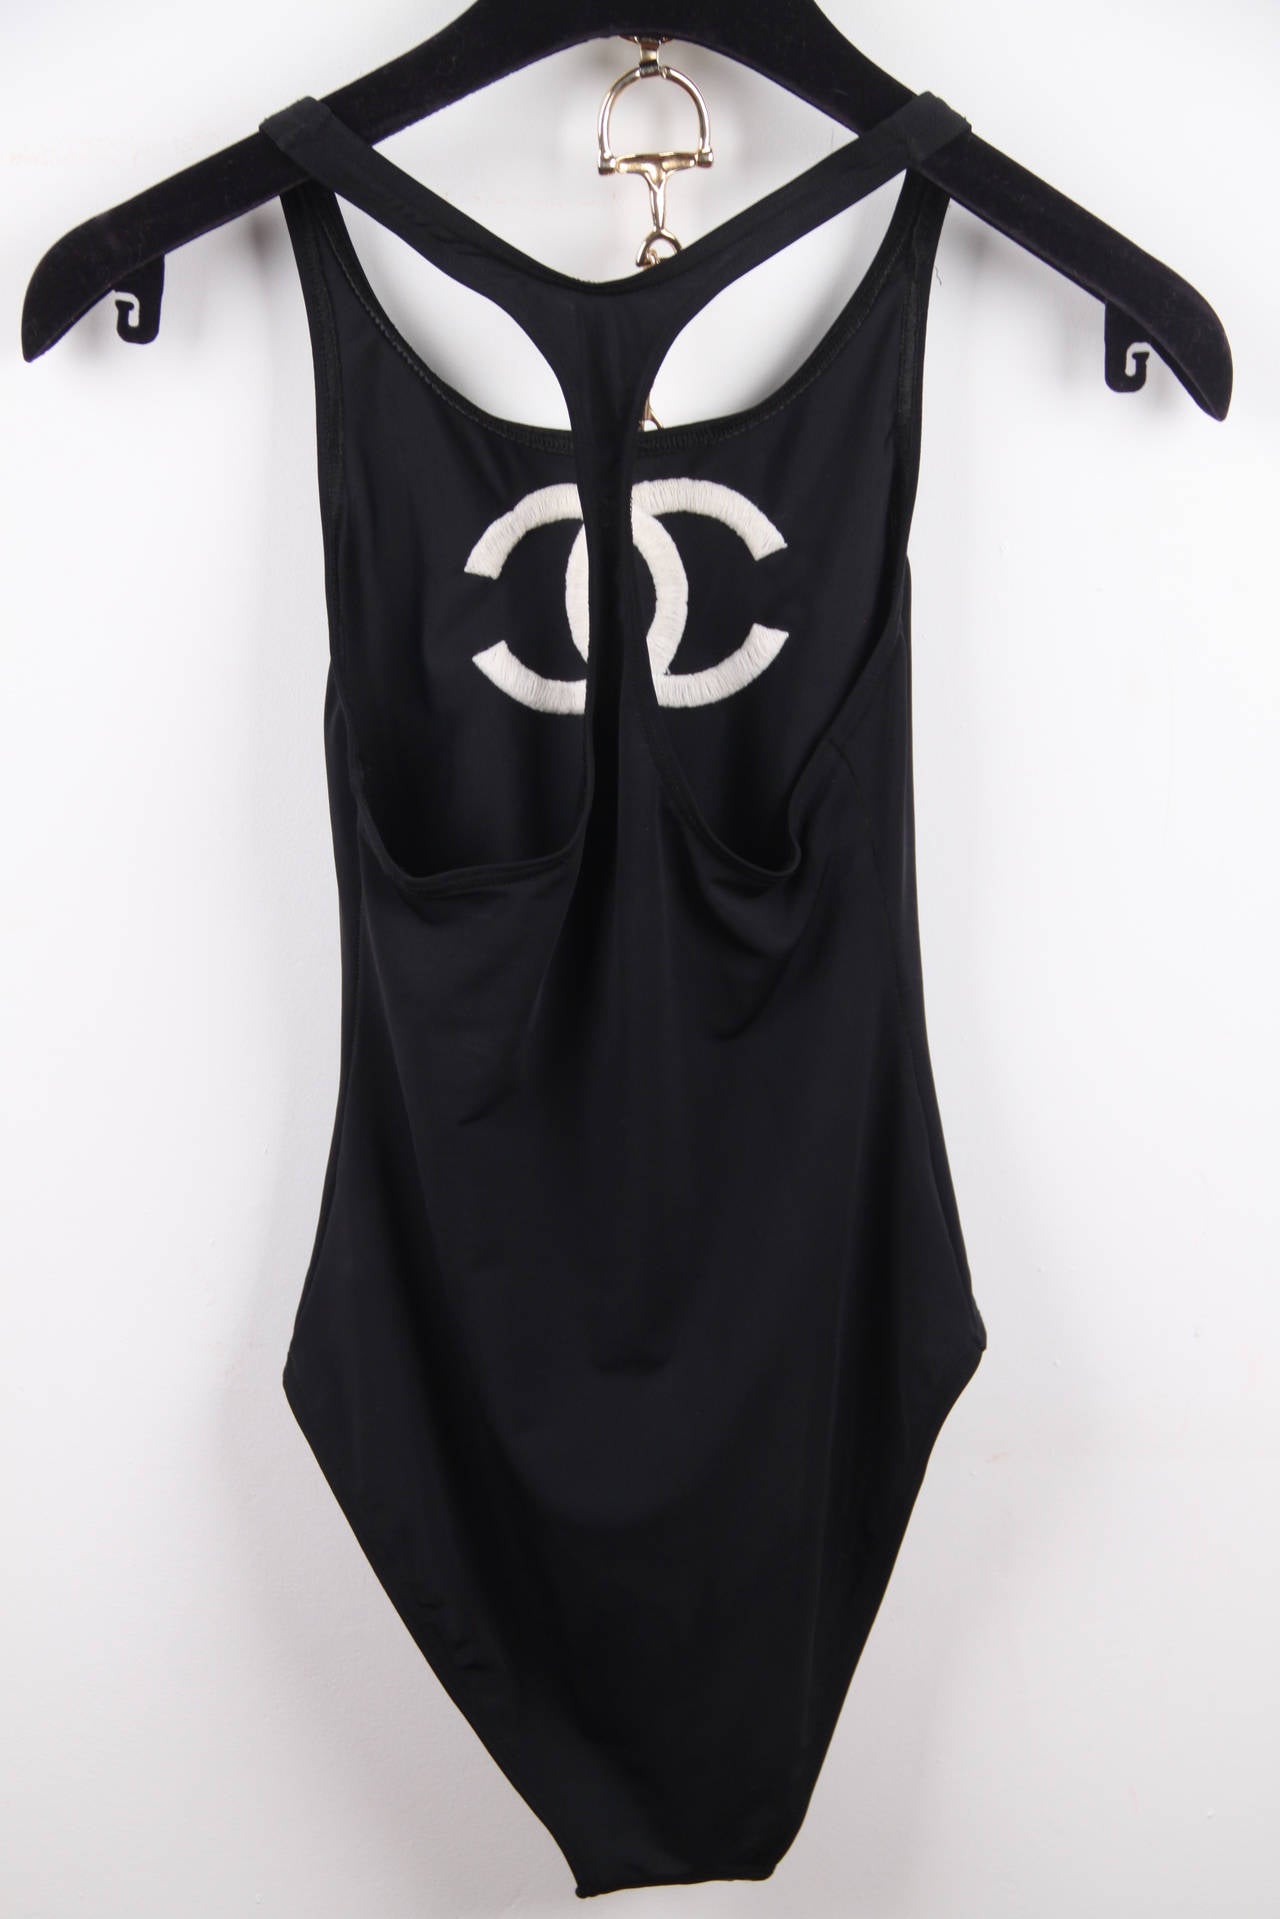 CHANEL Vintage Black ONE PIECE SWIMSUIT w/ CC LOGO Size 38 at 1stDibs